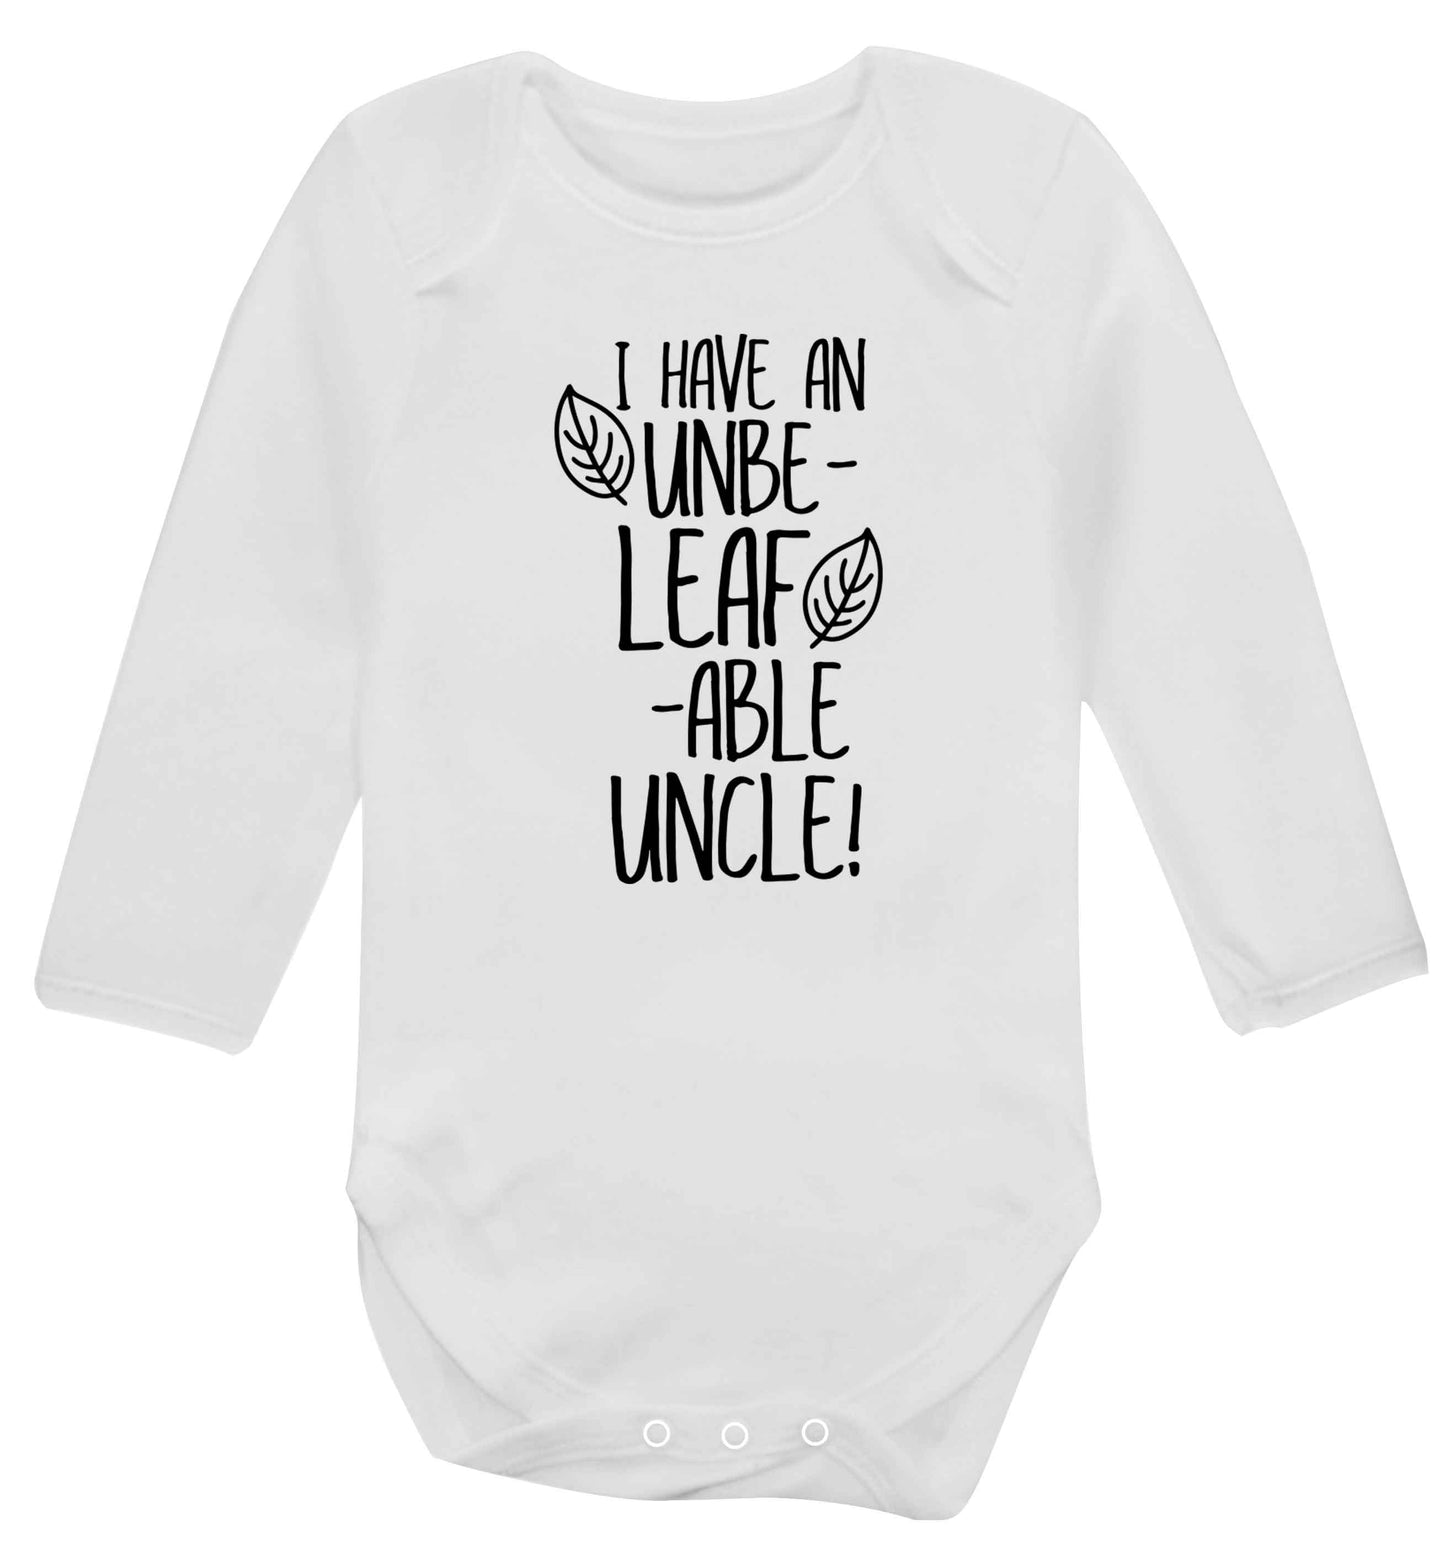 I have an unbe-leaf-able uncle Baby Vest long sleeved white 6-12 months